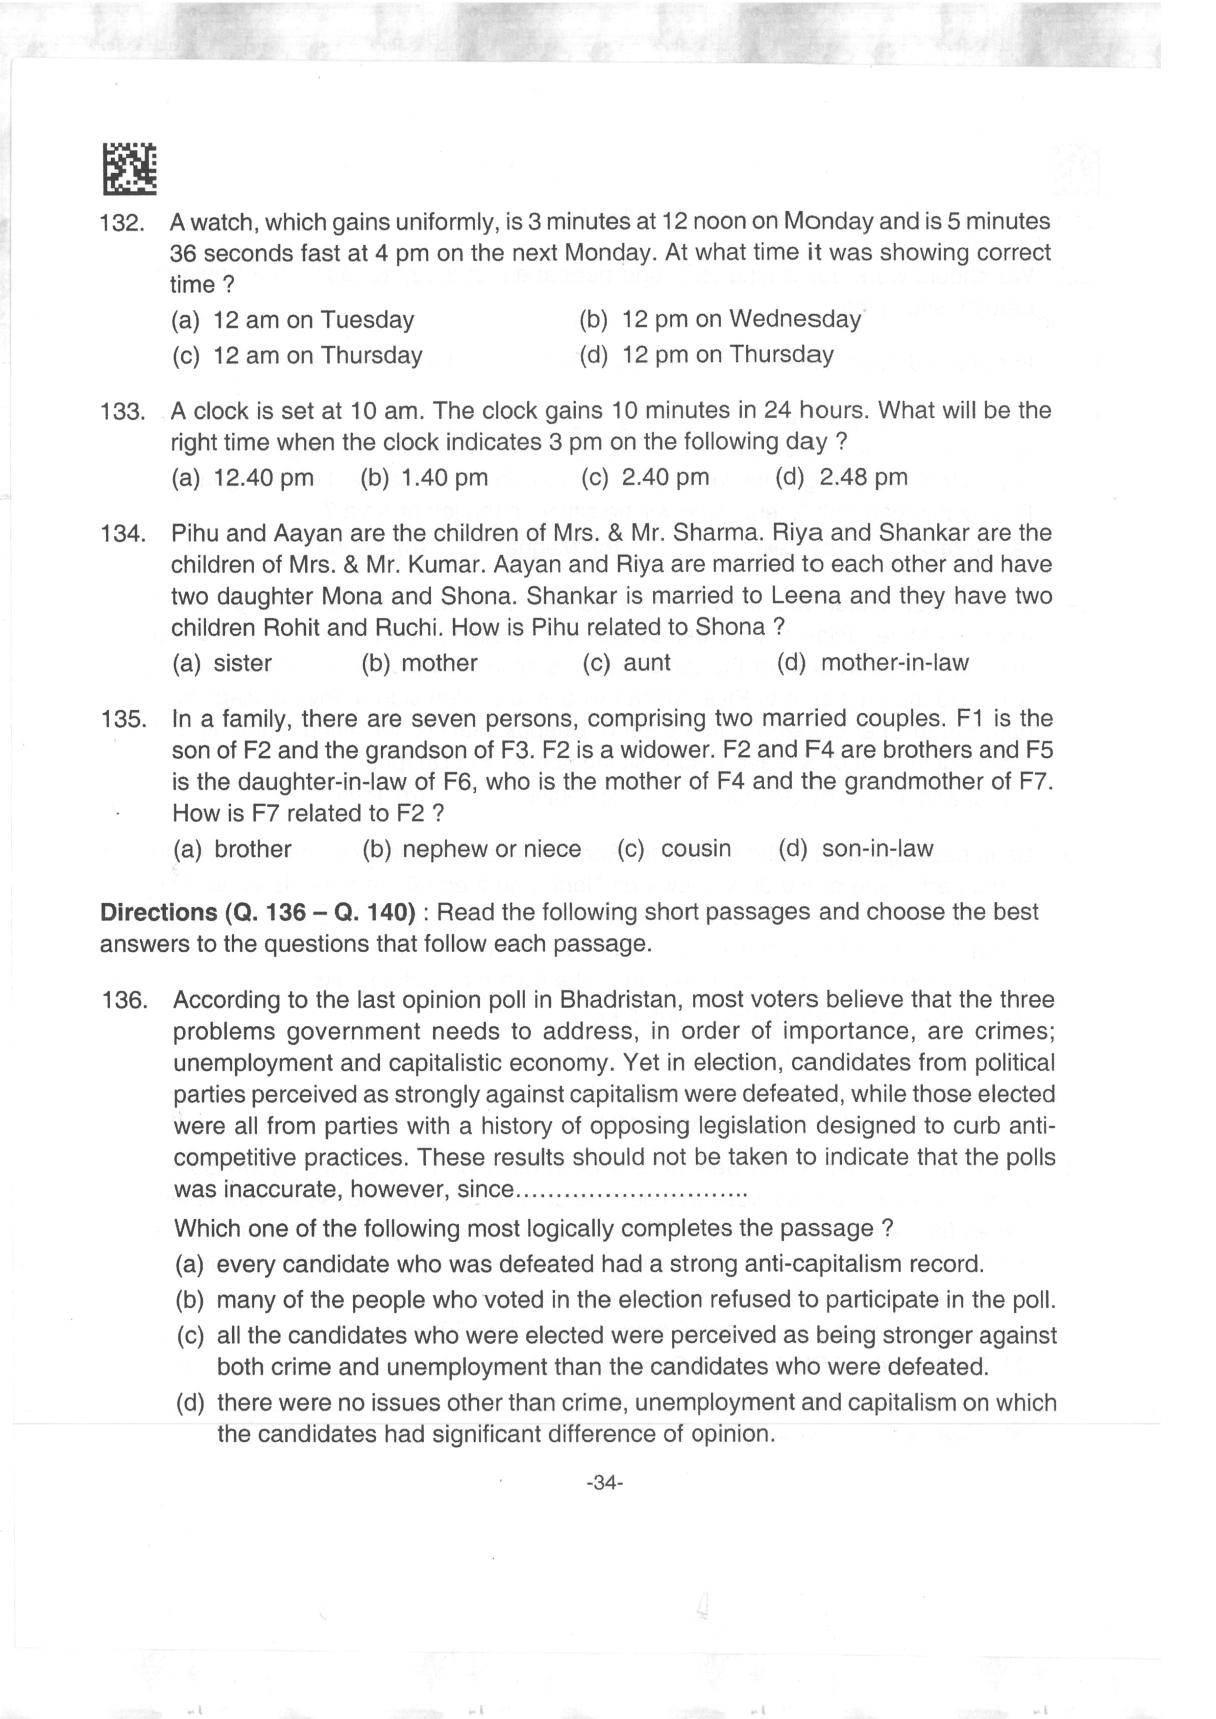 AILET 2019 Question Paper for BA LLB - Page 34